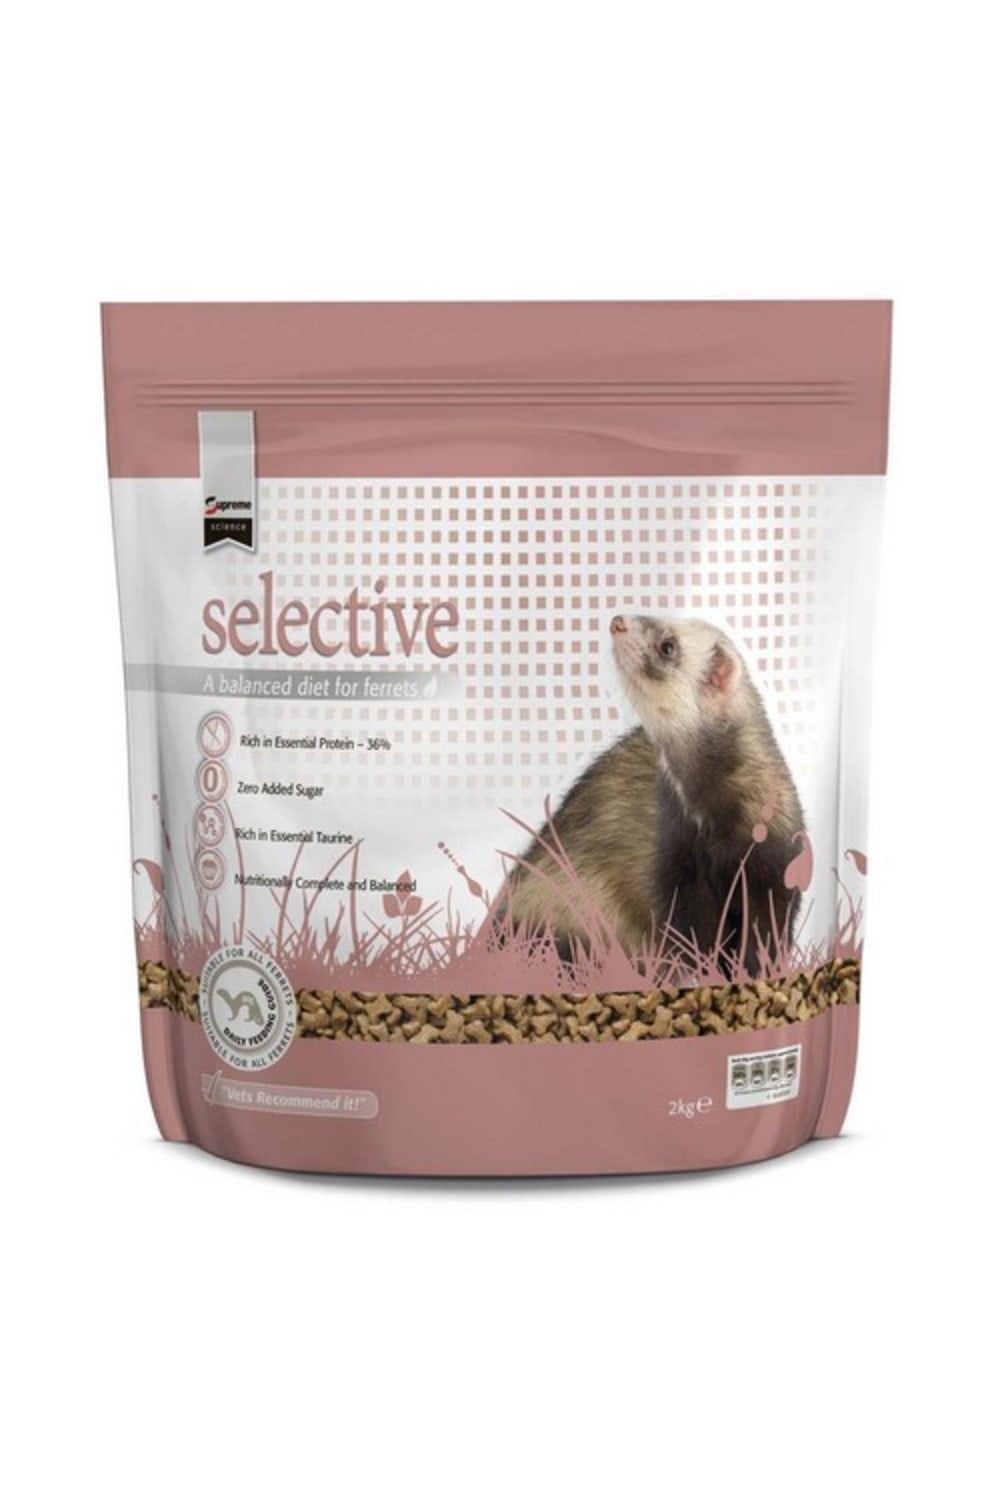 Supreme Science Selective Ferret Food (May Vary) (2kg)